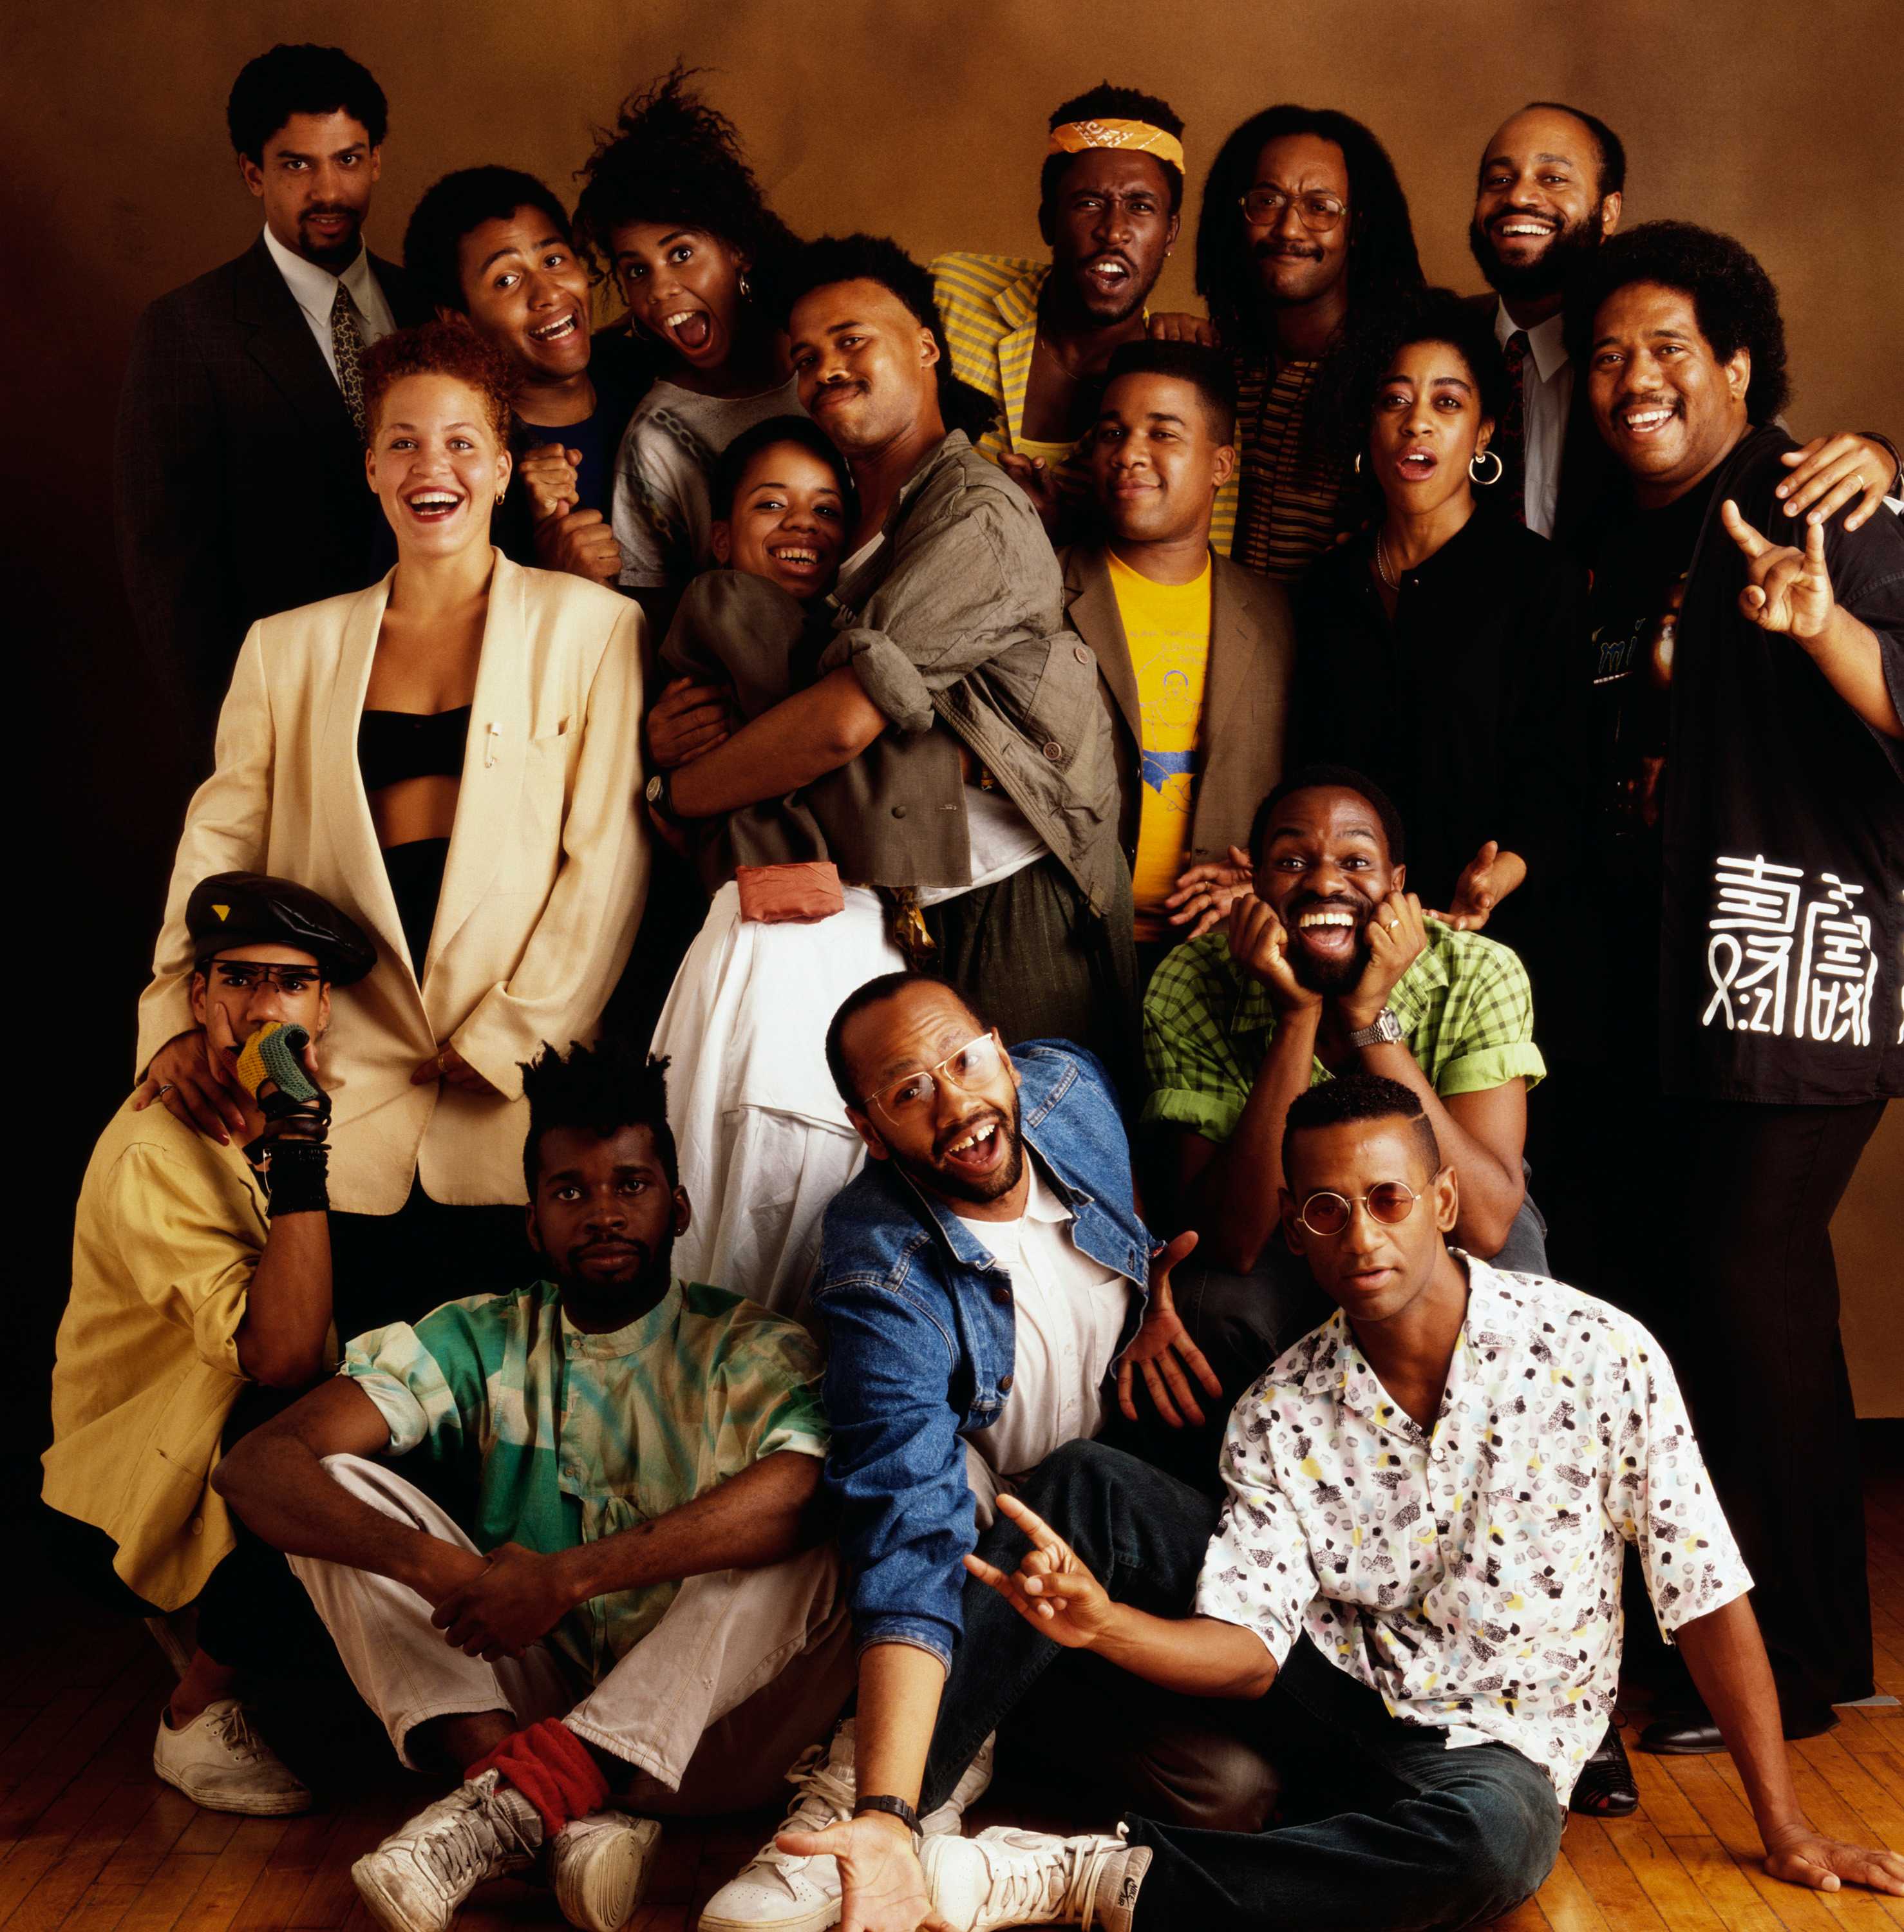 A color photo of entire band of Black Rock Coalition against a brown background.